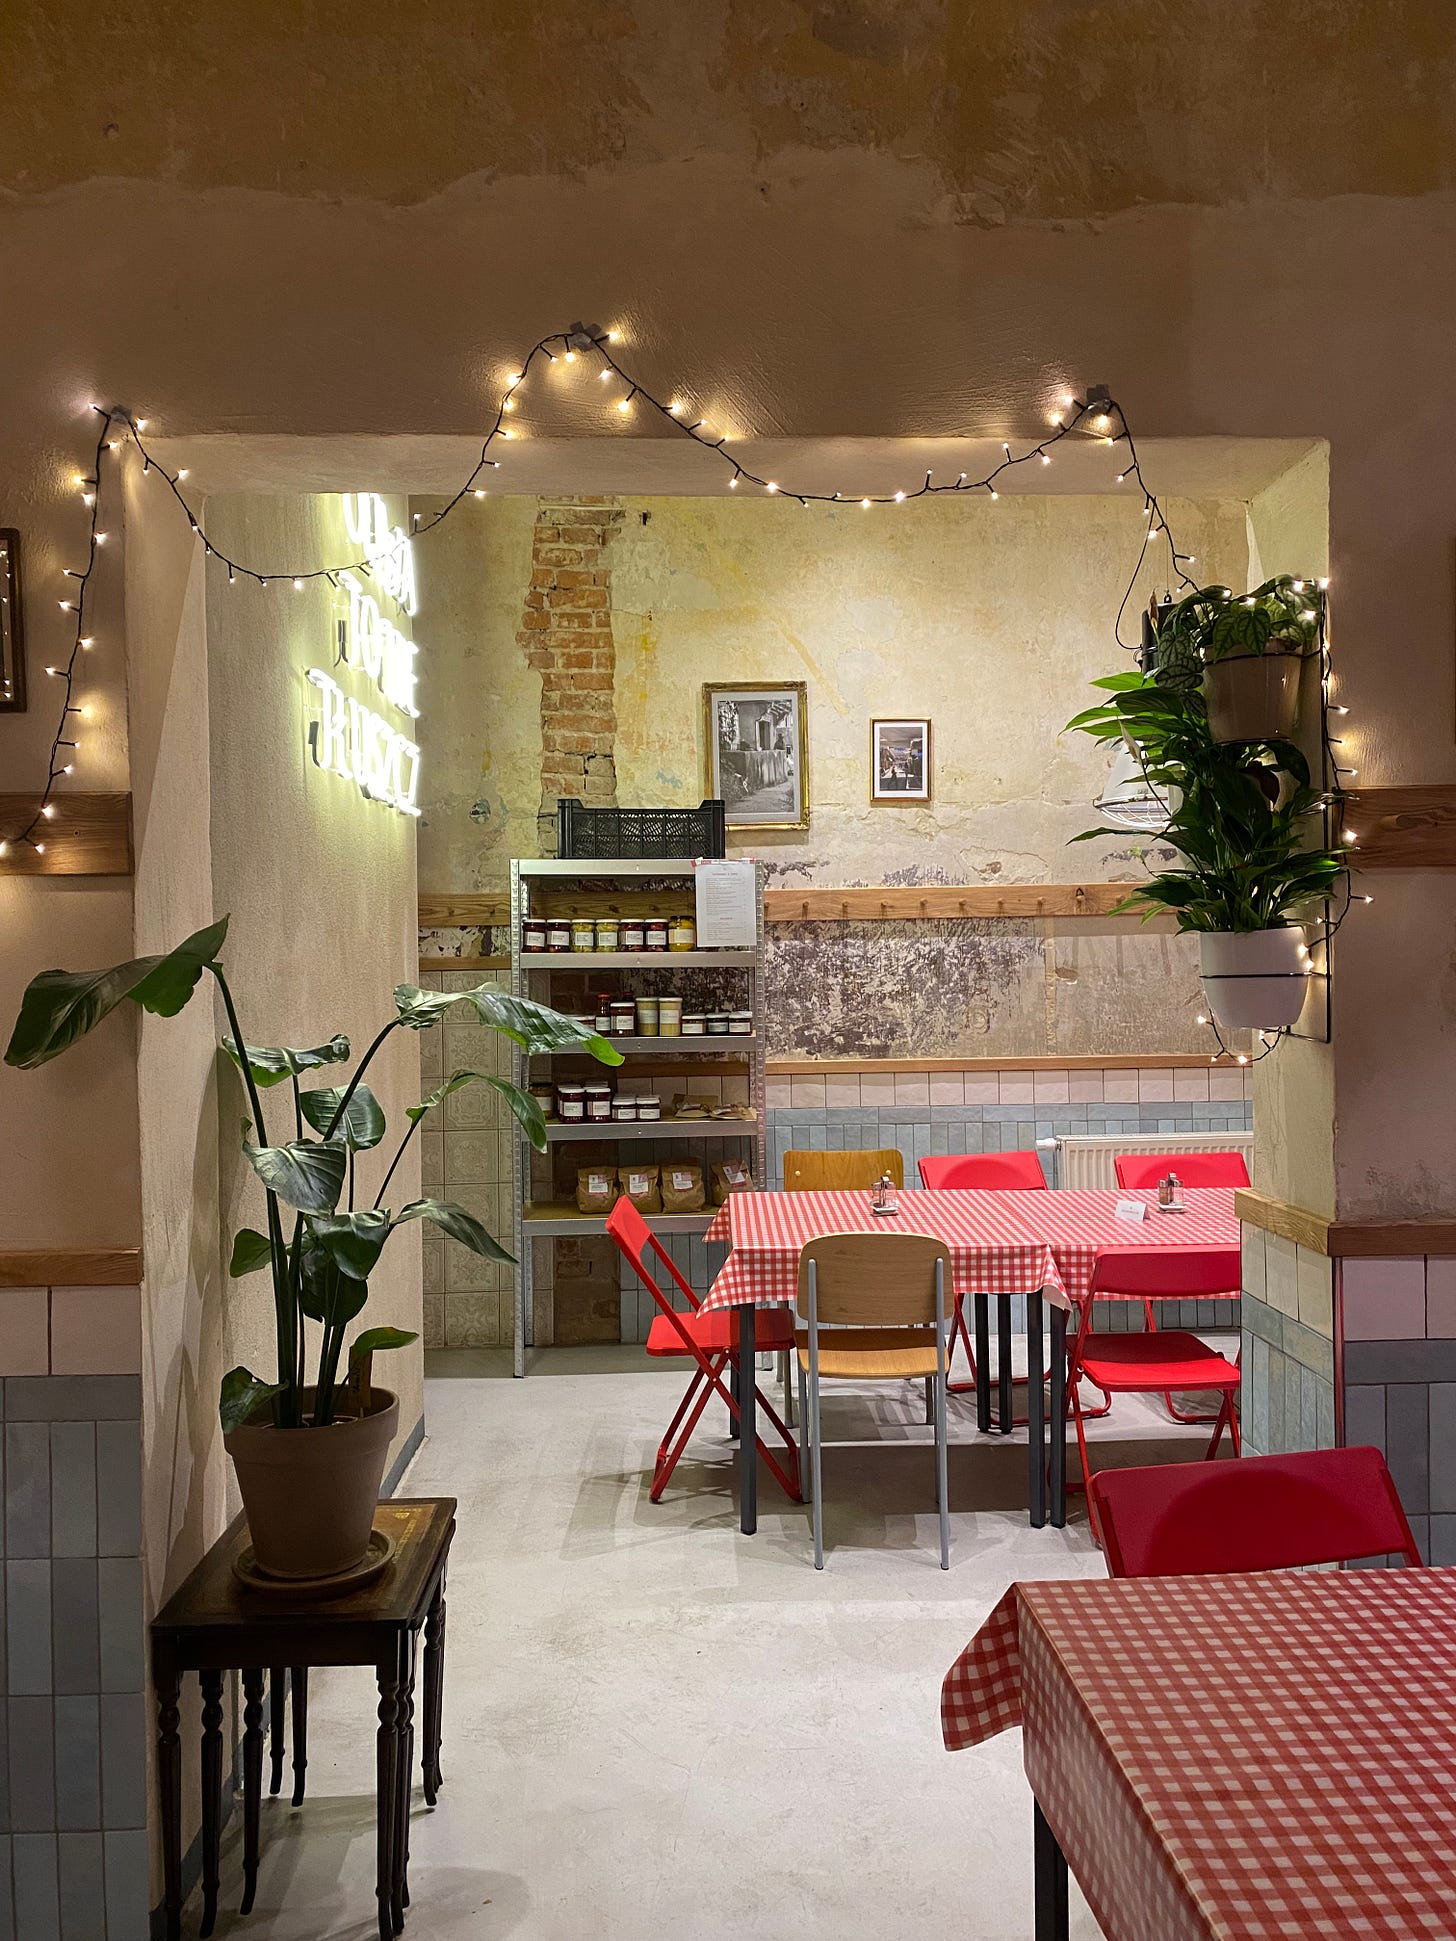 Another view of the restaurant from before. There is a bare brick wall with occasional plaster. Small tables sit in the background with the checkered tablecloths and folding chairs. In the foreground, there are fairy lights and house plants.